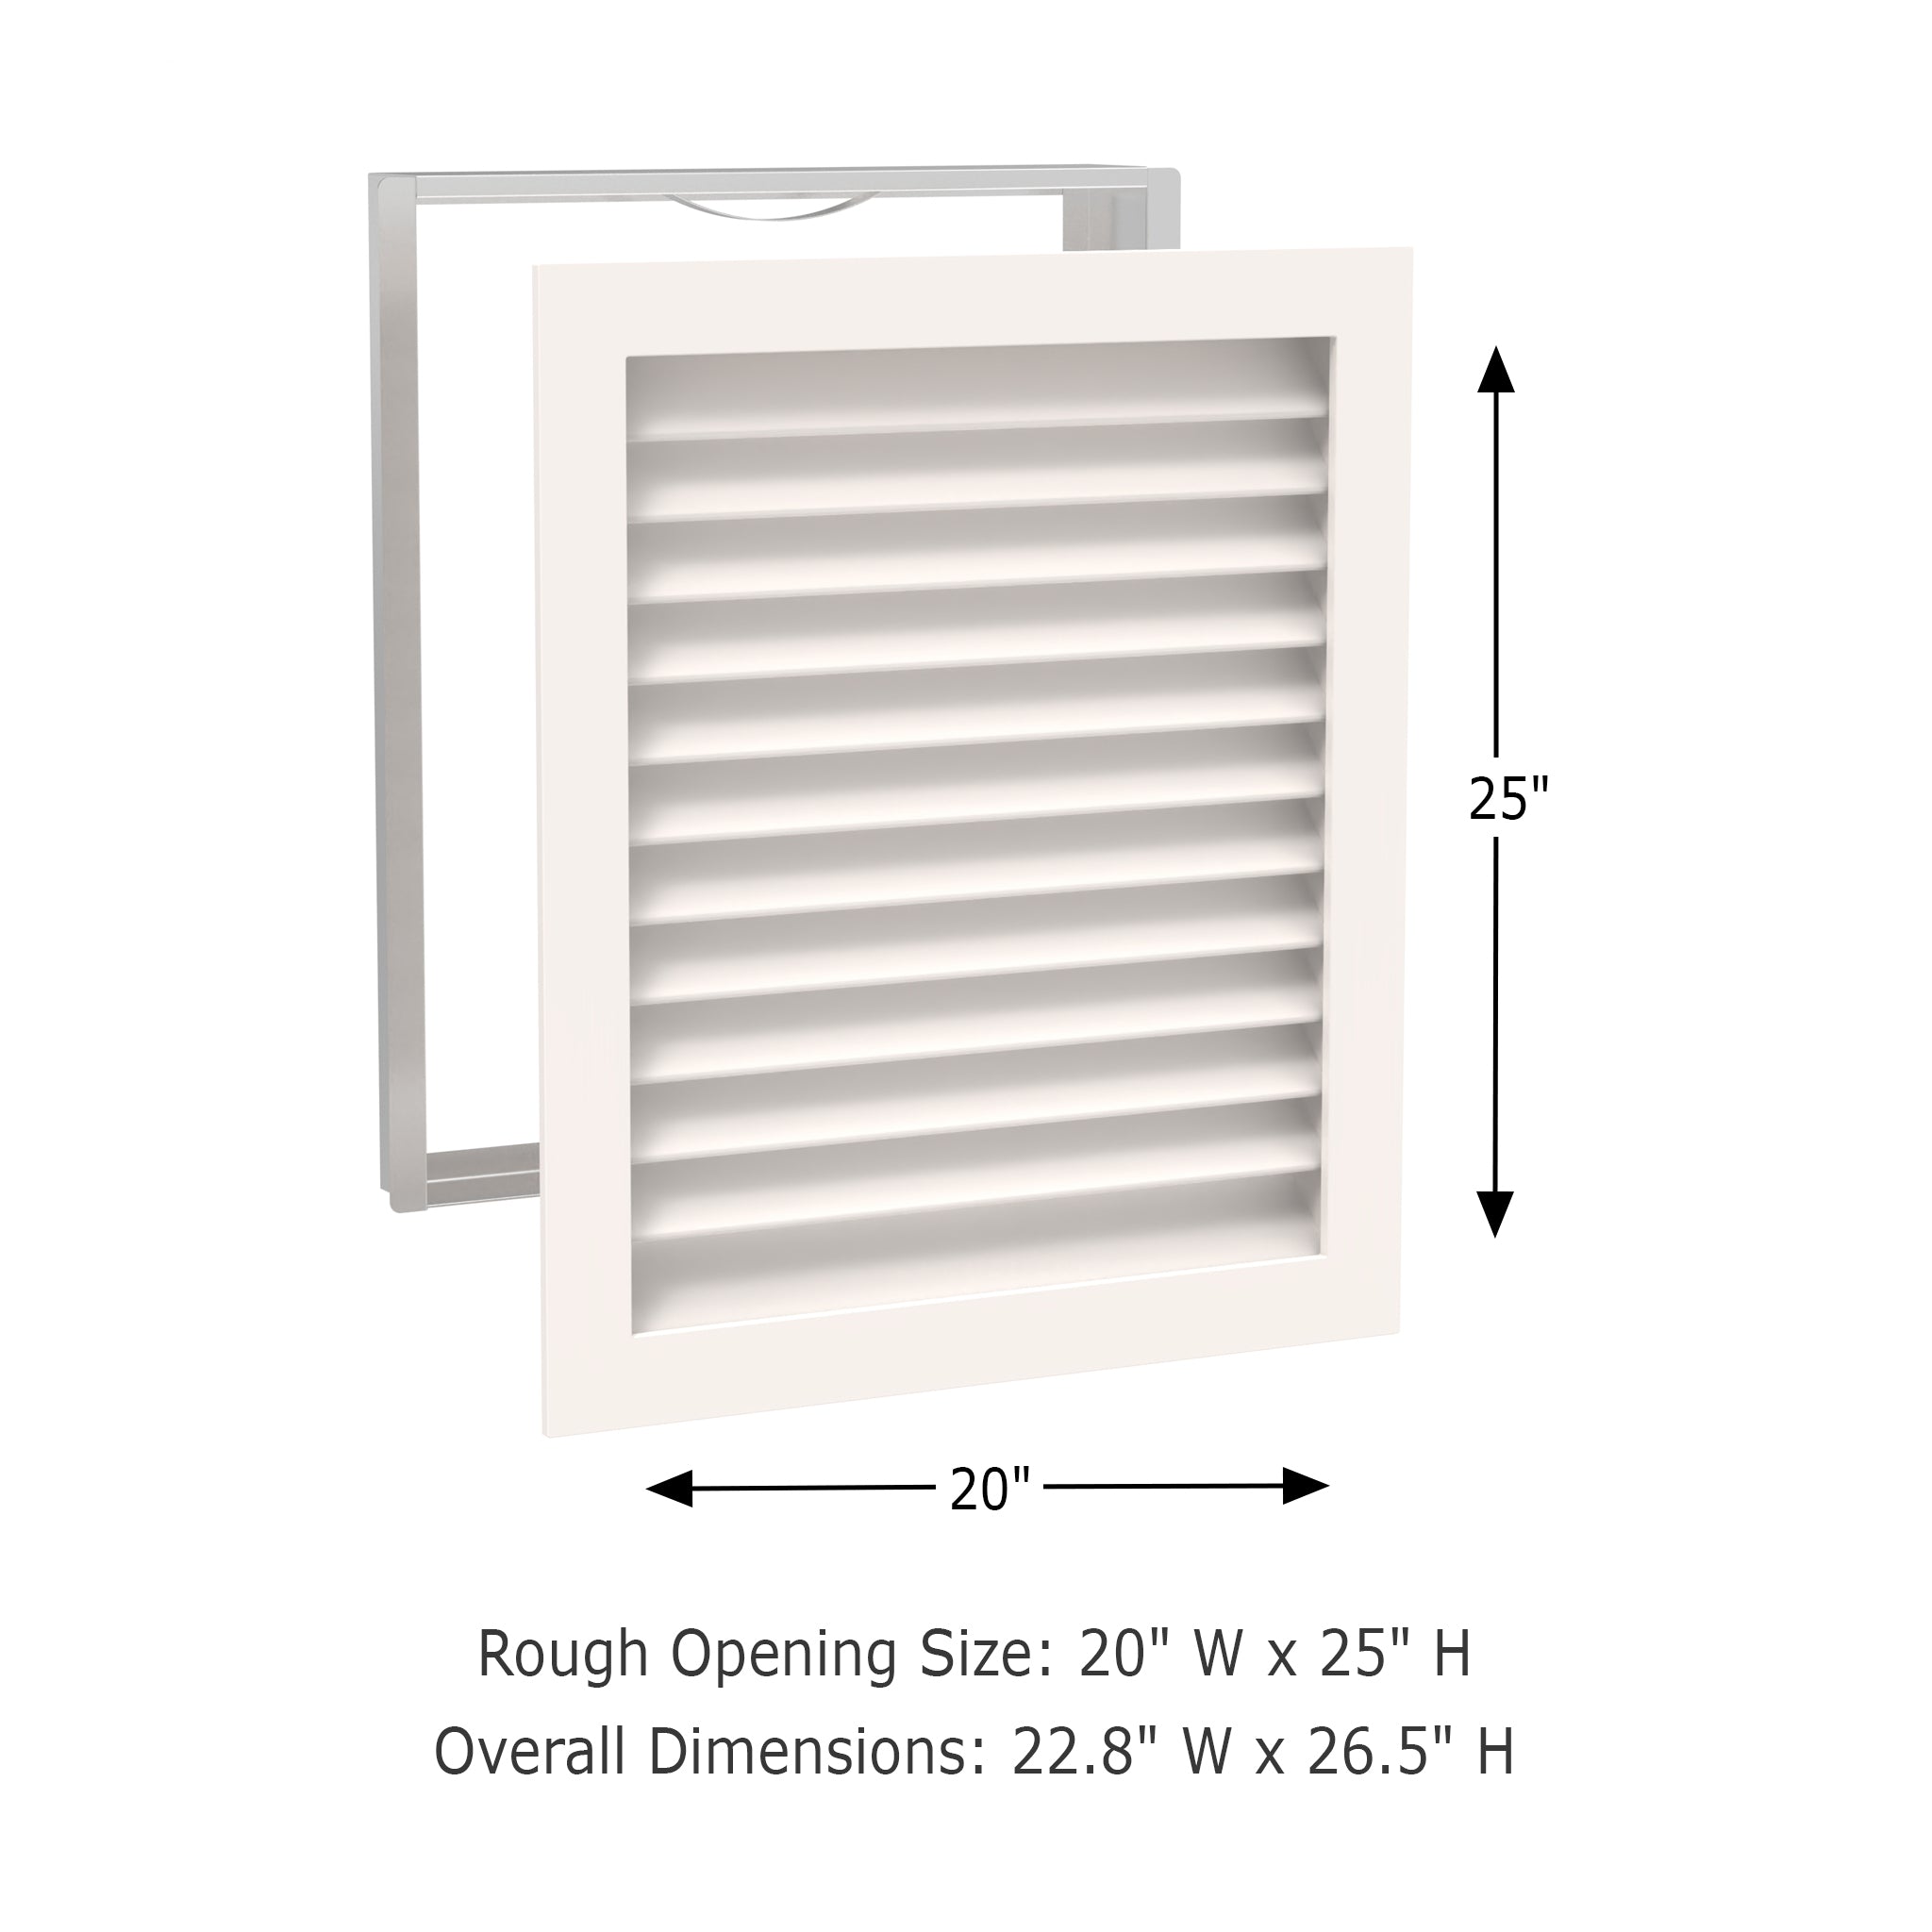 Worth Home Products - decorative wood AC vent covers luxury return vent - Primed Wood Louvers 20x25